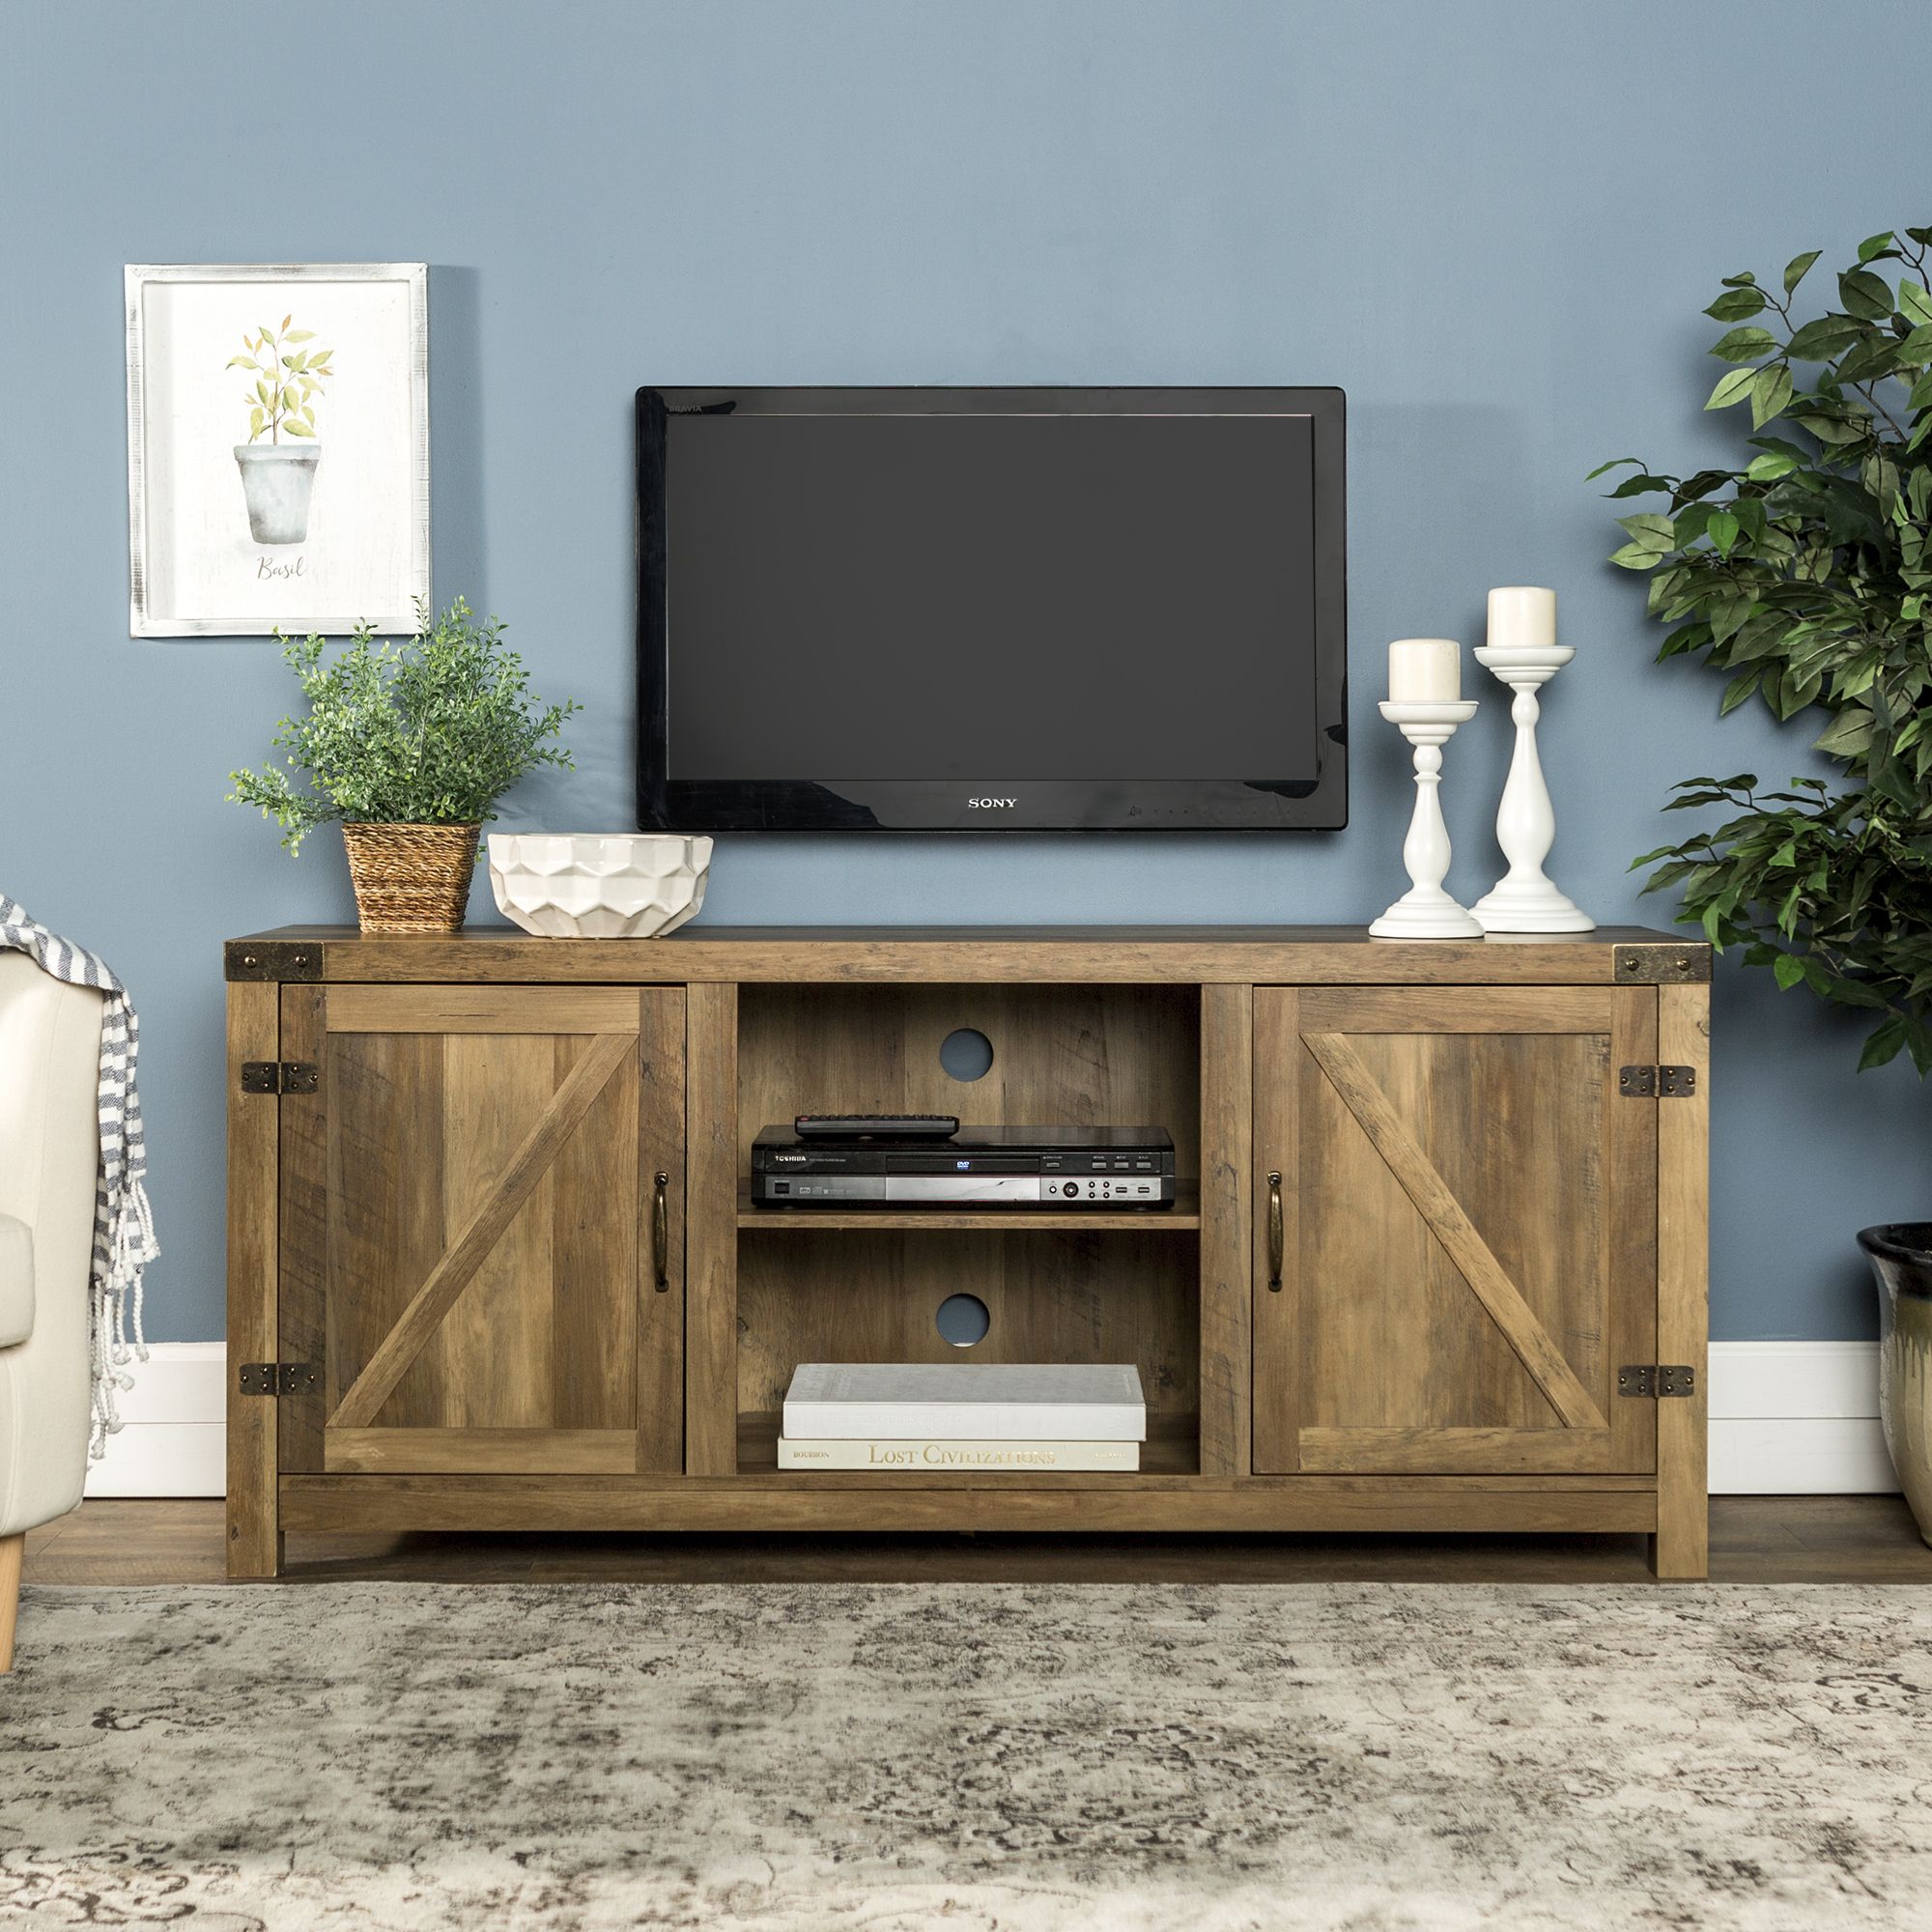 Manor Park Farmhouse Tv Stand For Tvs Up To 65", Reclaimed With Bloomfield Tv Stands For Tvs Up To 65" (View 11 of 15)